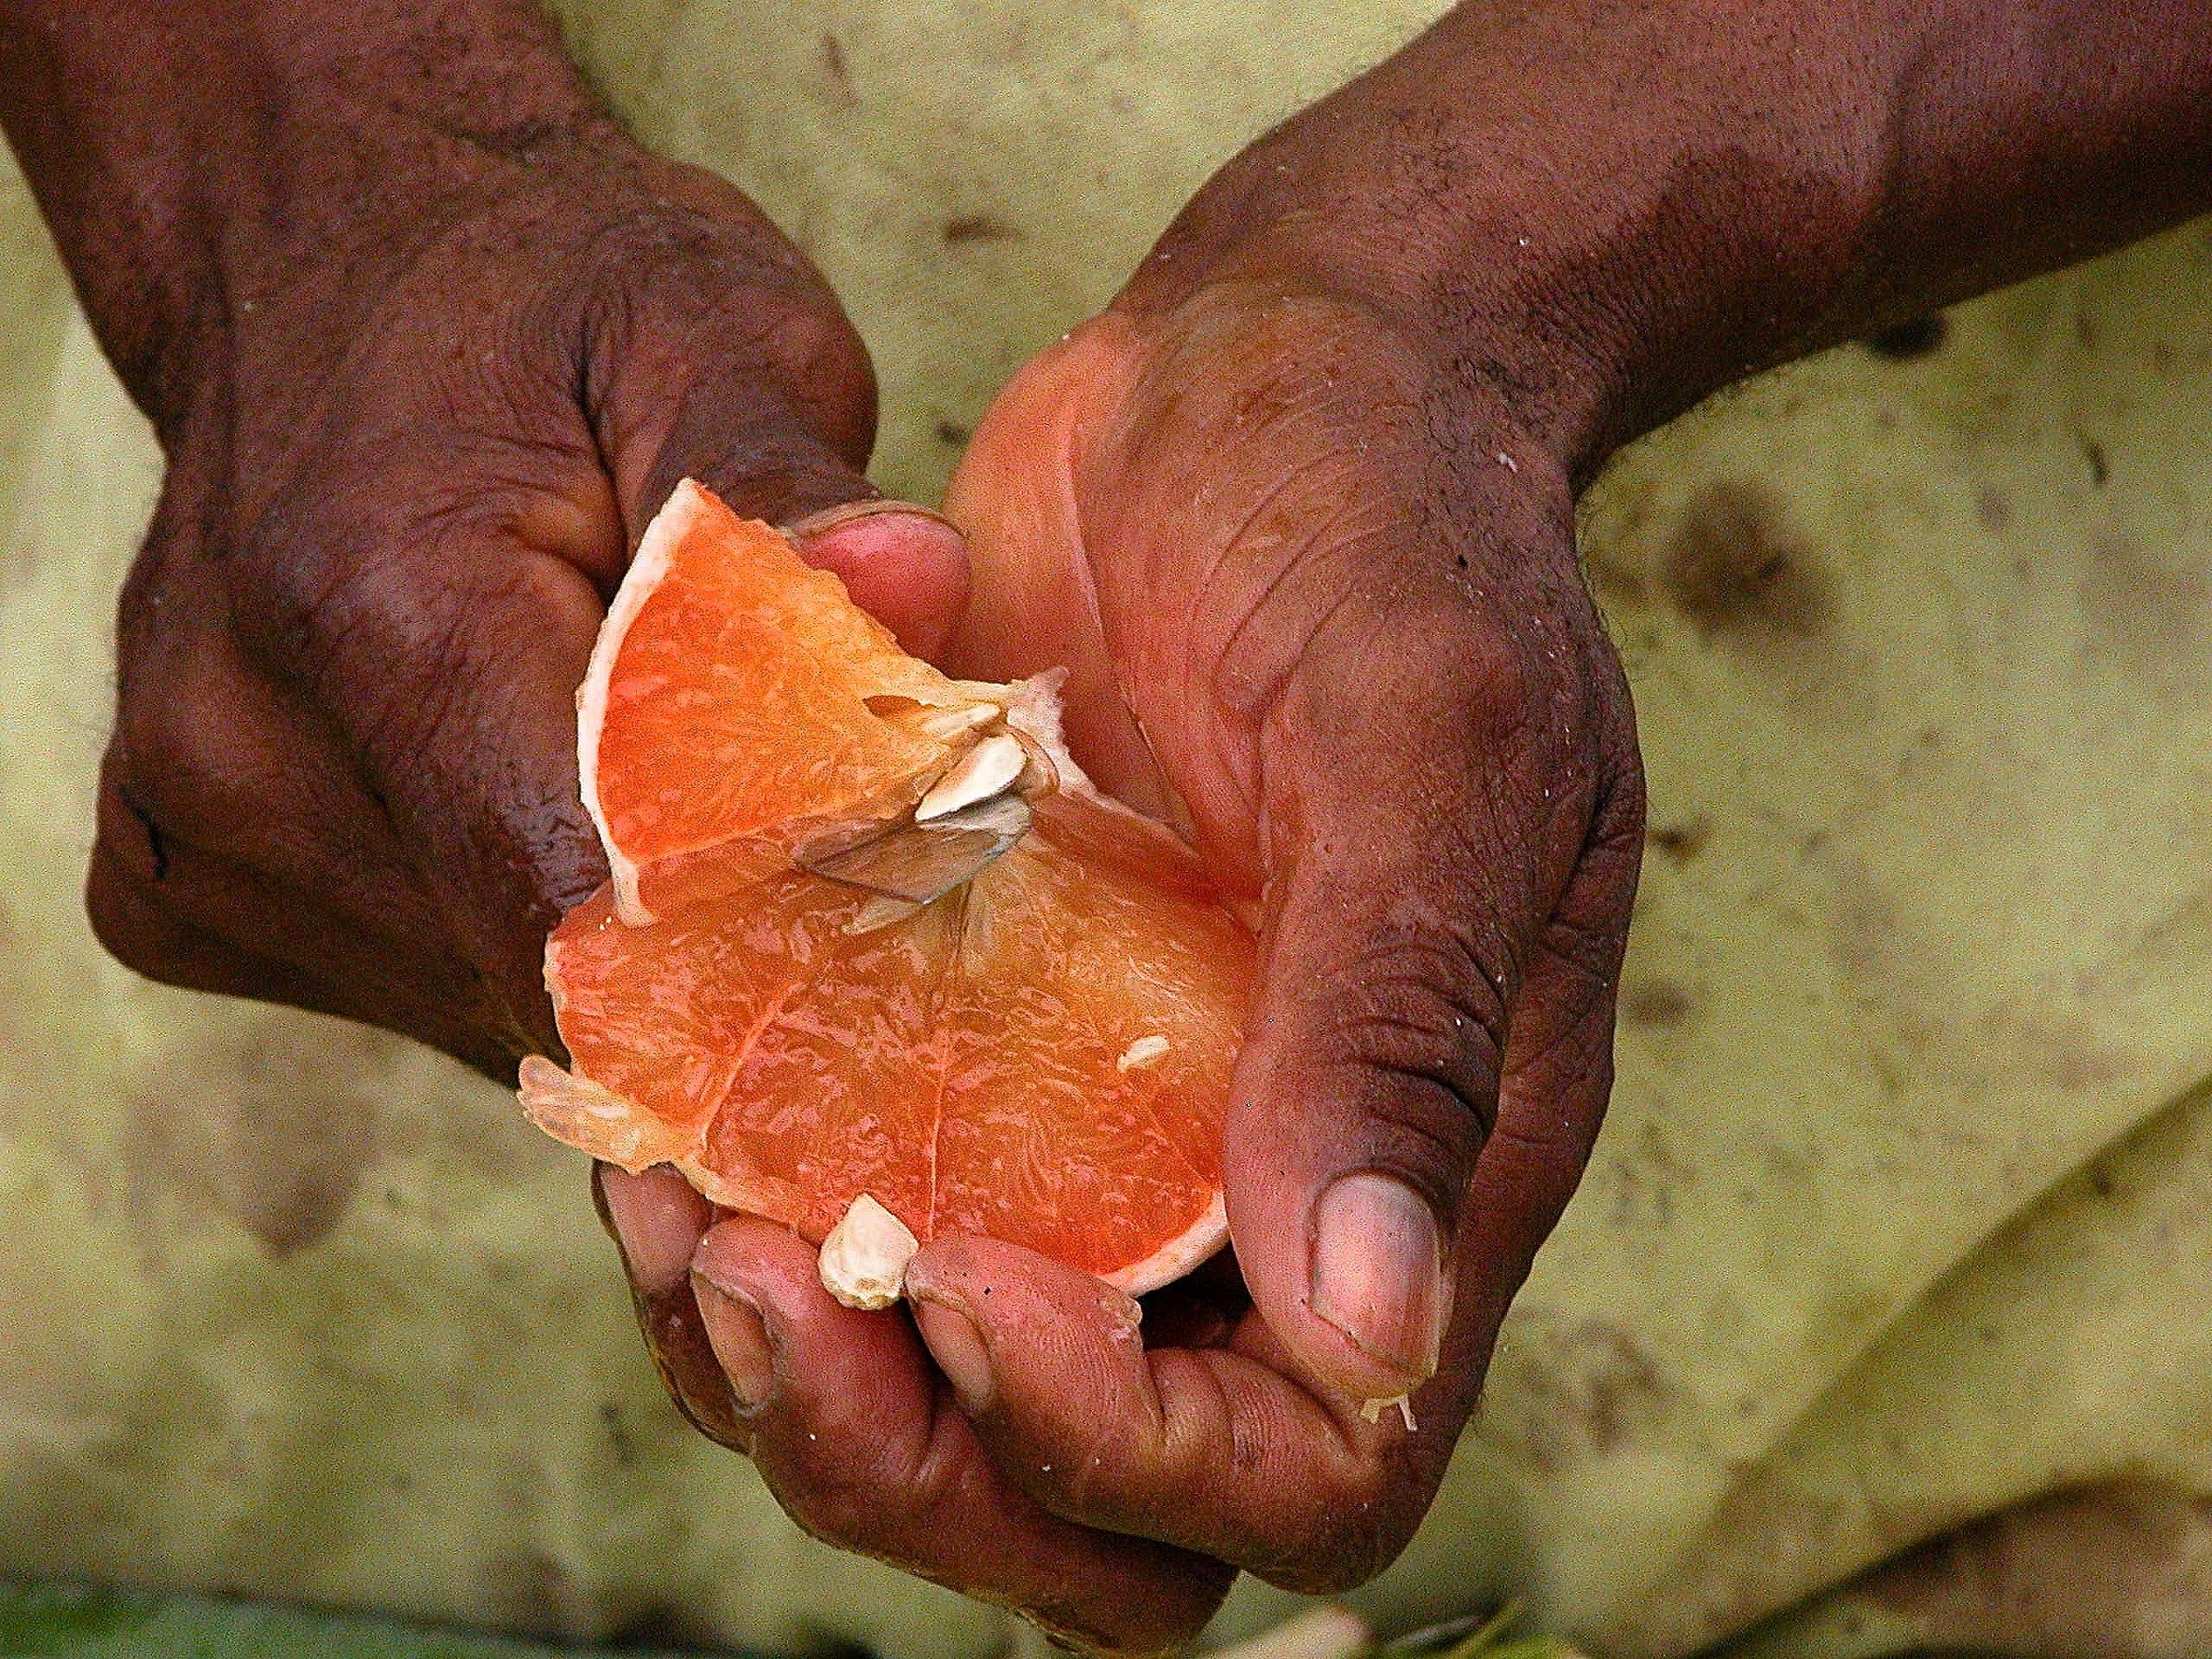 The fruit in the hands...